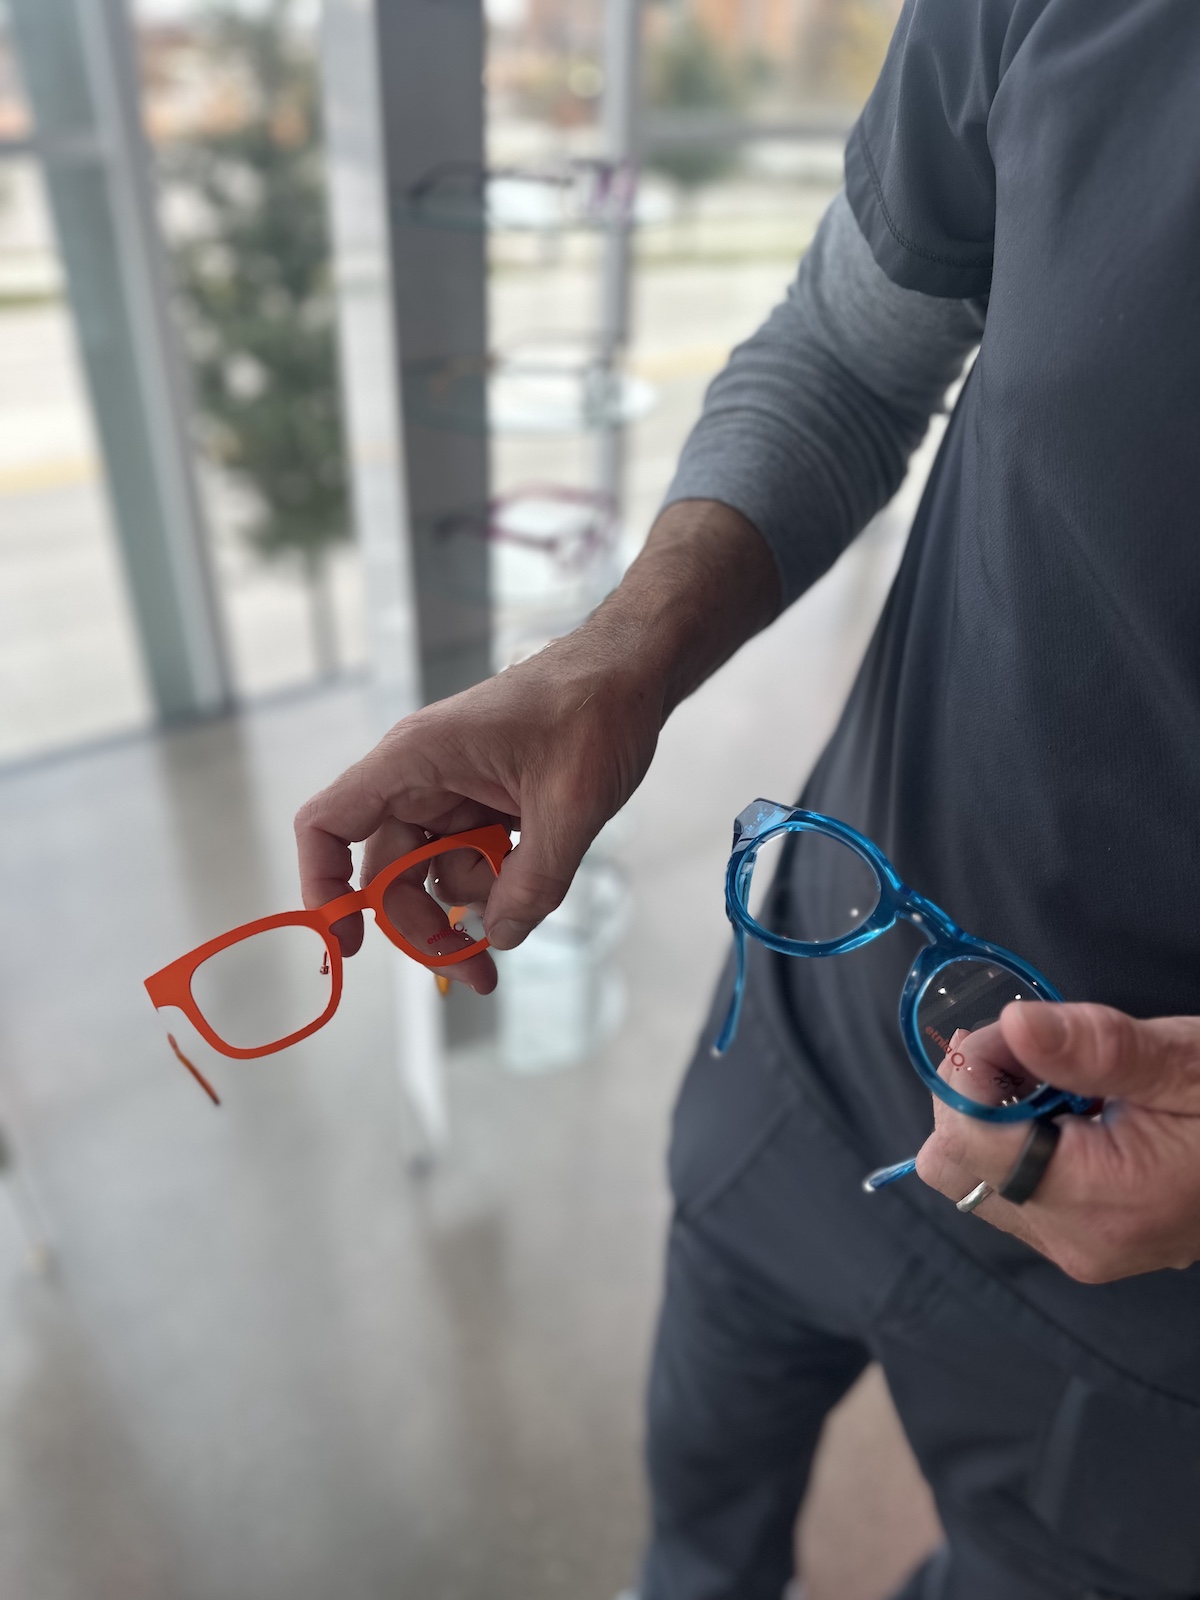 Dr. Barber at CHROMA in Fort Worth showing some glasses.